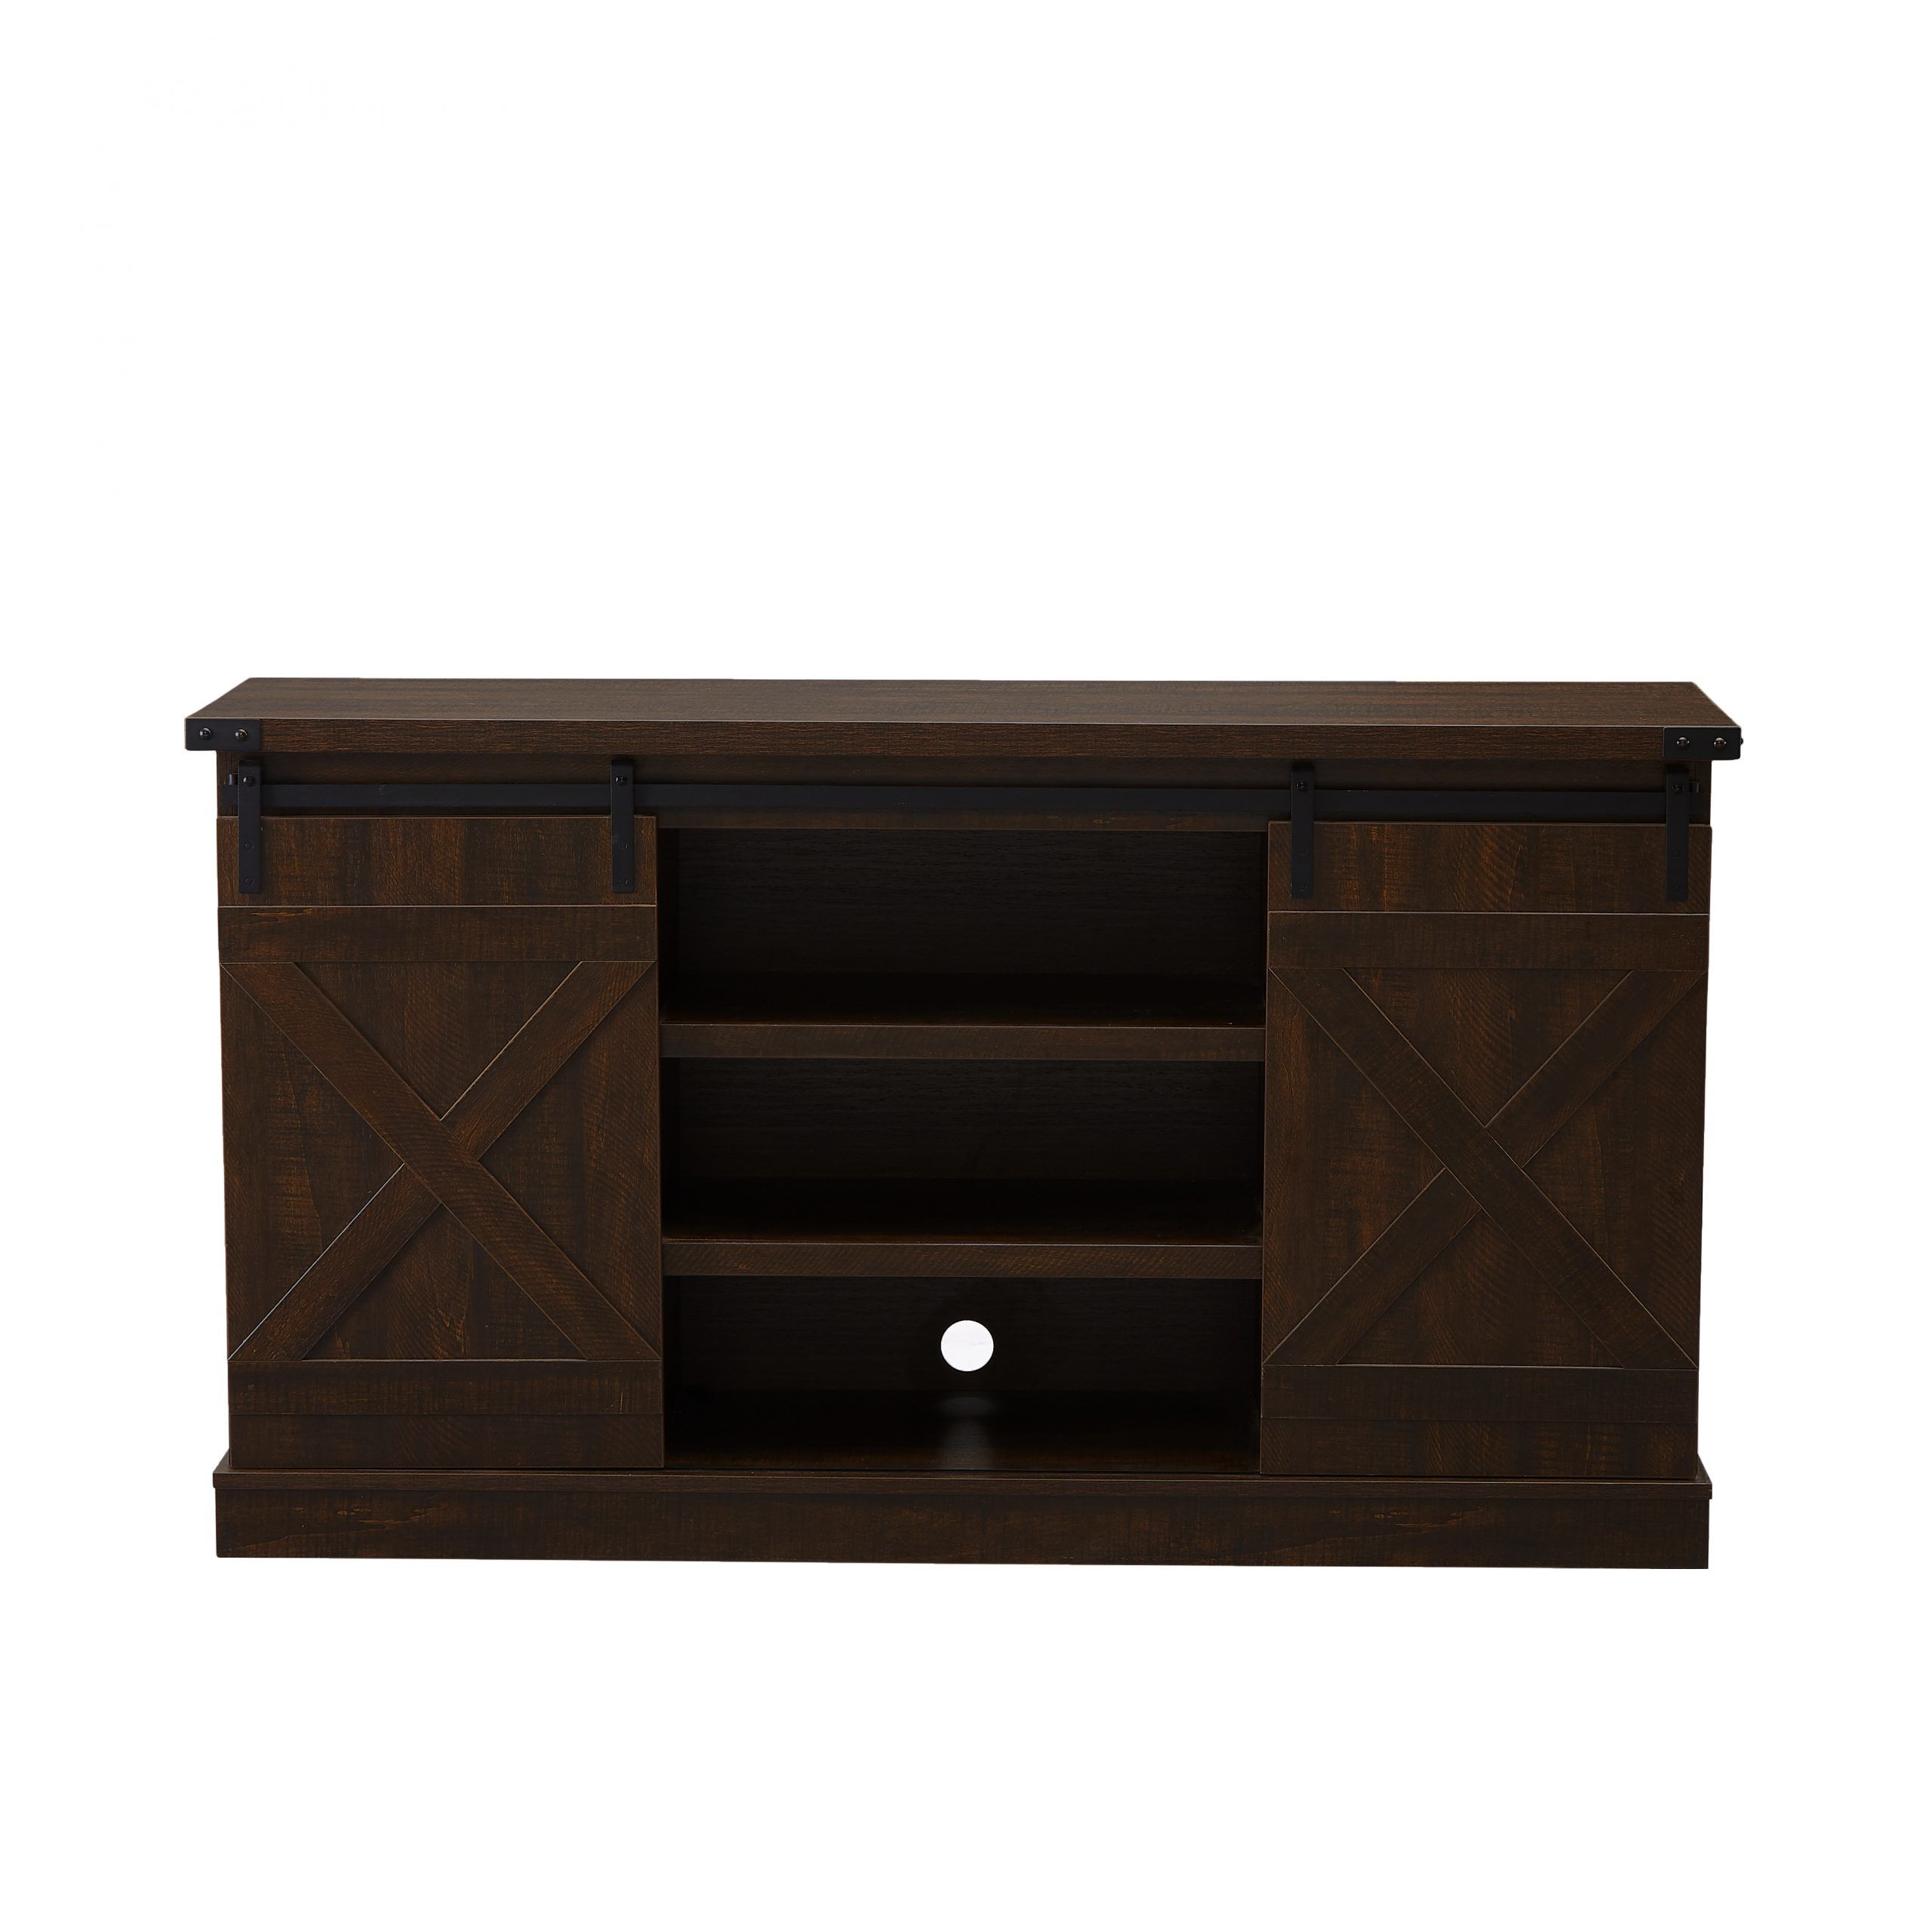 Widely Used Tv Stands With Cable Management Regarding Farmhouse 54'' Tv Stands With Sliding Barn Door, Segmart (View 8 of 10)